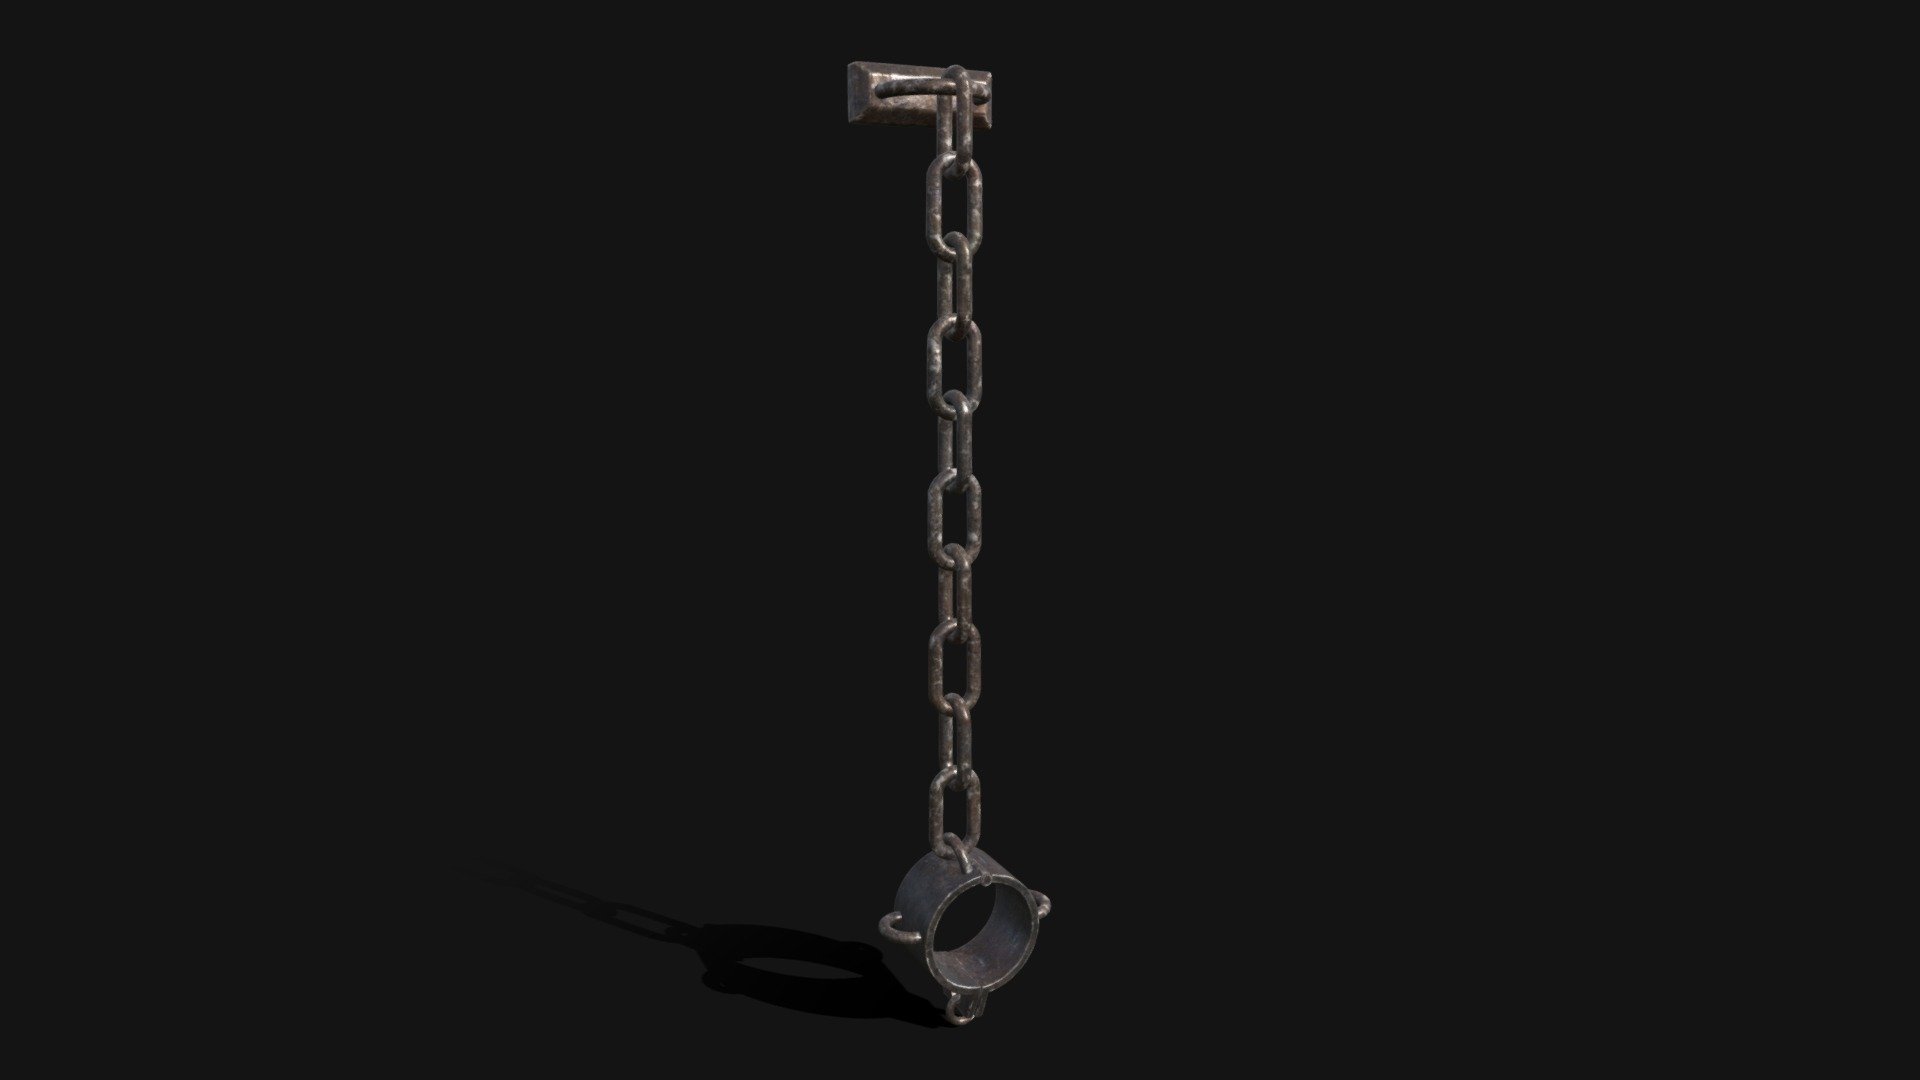 Medieval Cuff Shackles 3D Model. This model contains the Medieval Cuff Shackles itself 

All modeled in Maya, textured with Substance Painter.

The model was built to scale and is UV unwrapped properly. Contains a 4K texture set 

⦁   11384 tris. 

⦁   Contains: .FBX .OBJ and .DAE

⦁   Model has clean topology. No Ngons.

⦁   Built to scale

⦁   Unwrapped UV Map

⦁   4K Texture set

⦁   High quality details

⦁   Based on real life references

⦁   Renders done in Marmoset Toolbag

Polycount: 

Verts 5760

Edges 11520 

Faces 5761

Tris 11384

If you have any questions please feel free to ask me 3d model